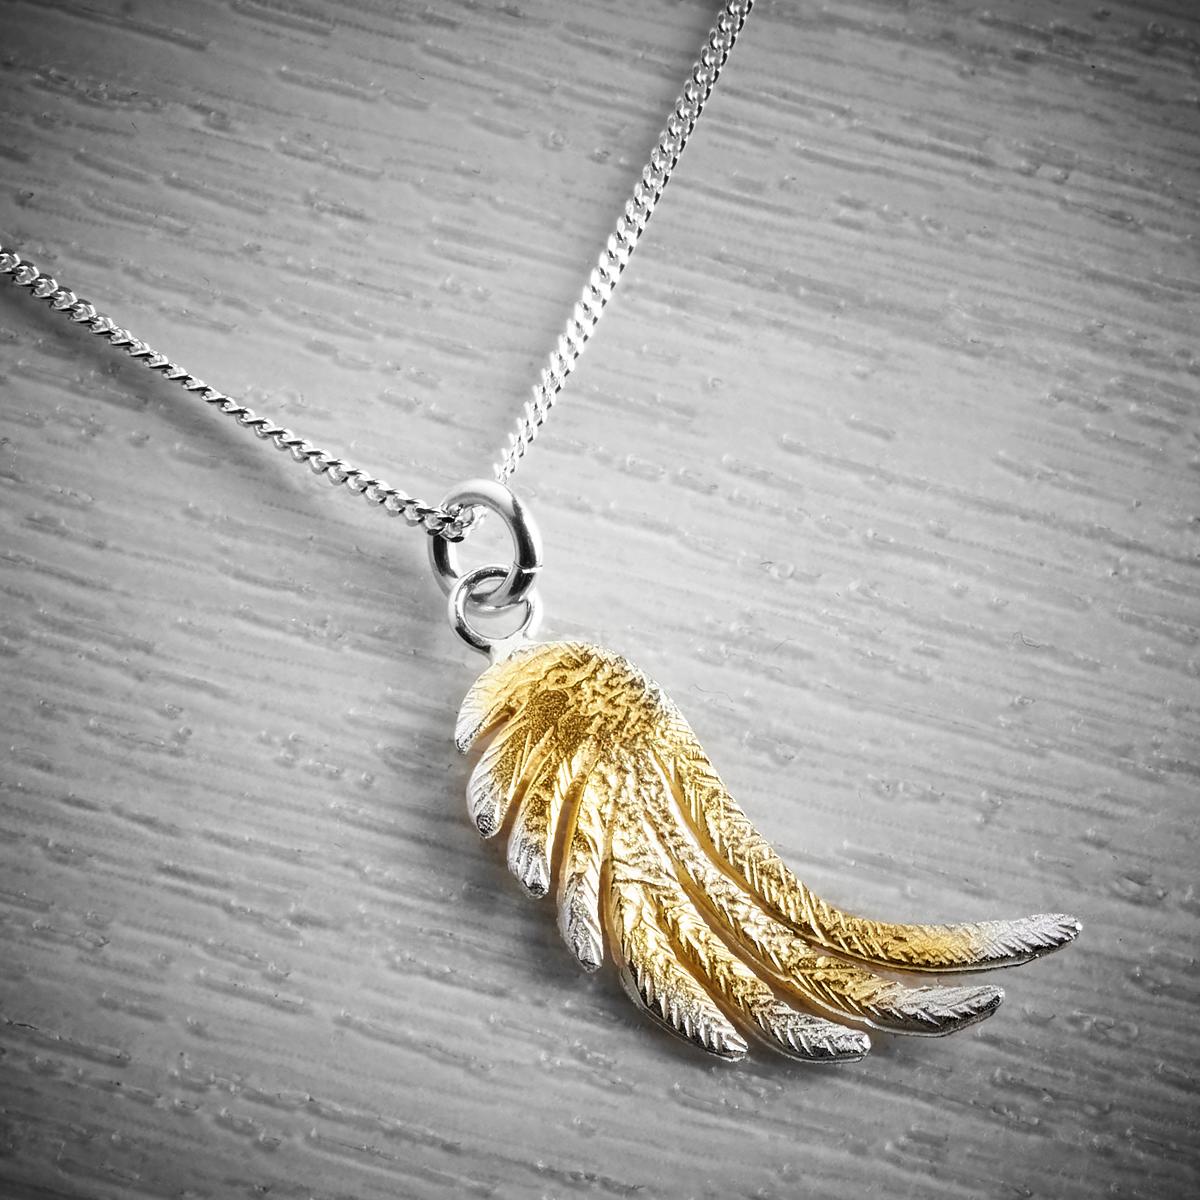 large silver and gold angel wings pendant by fi mehra available from THE JEWELLERY MAKERS, image property of EMMA WHITE-0